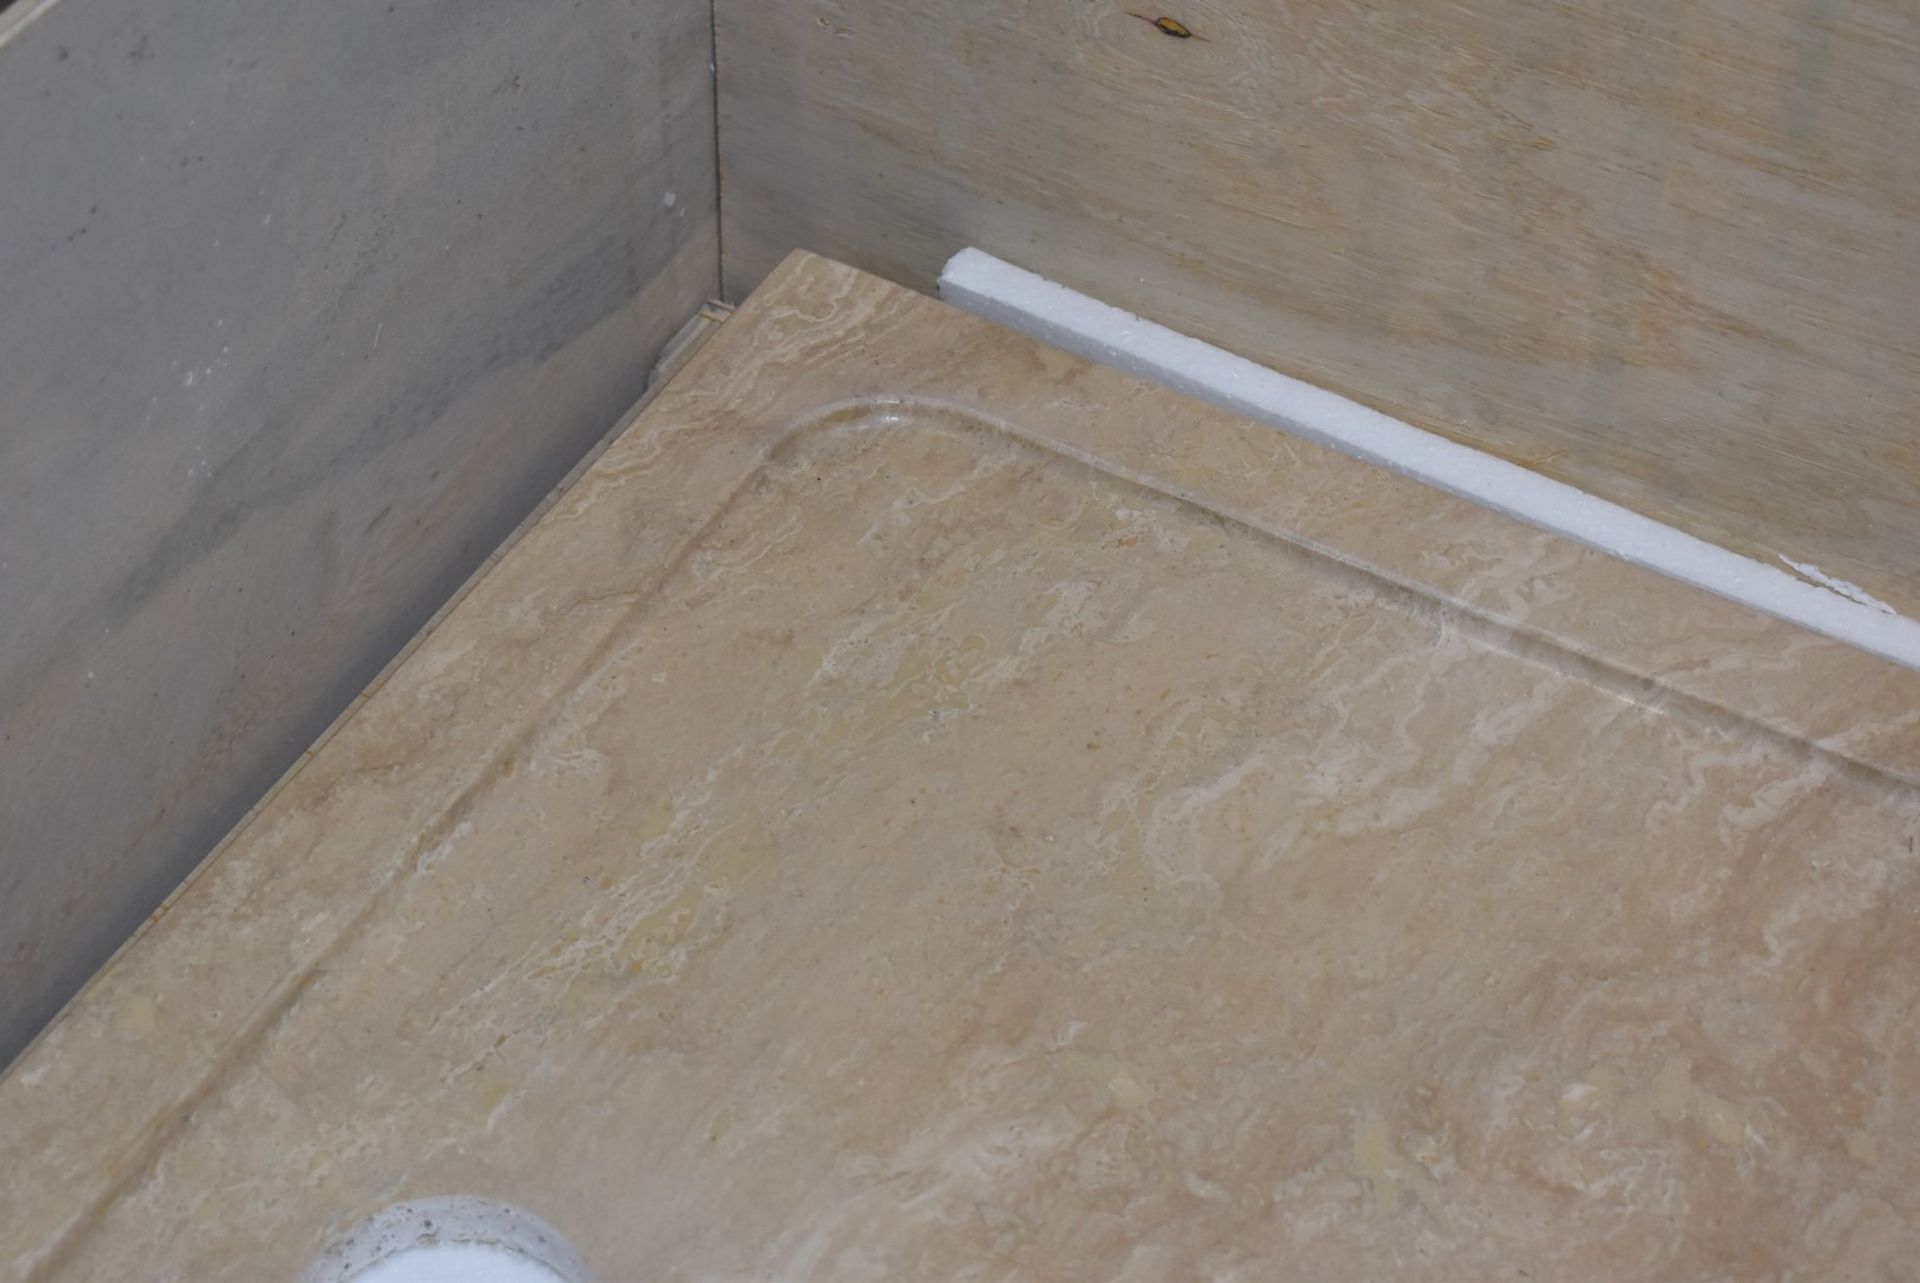 1 x Stonearth Luxury Solid Travertine Stone 900mm Shower Tray - Hand Made From Travertine Stone - Image 6 of 12